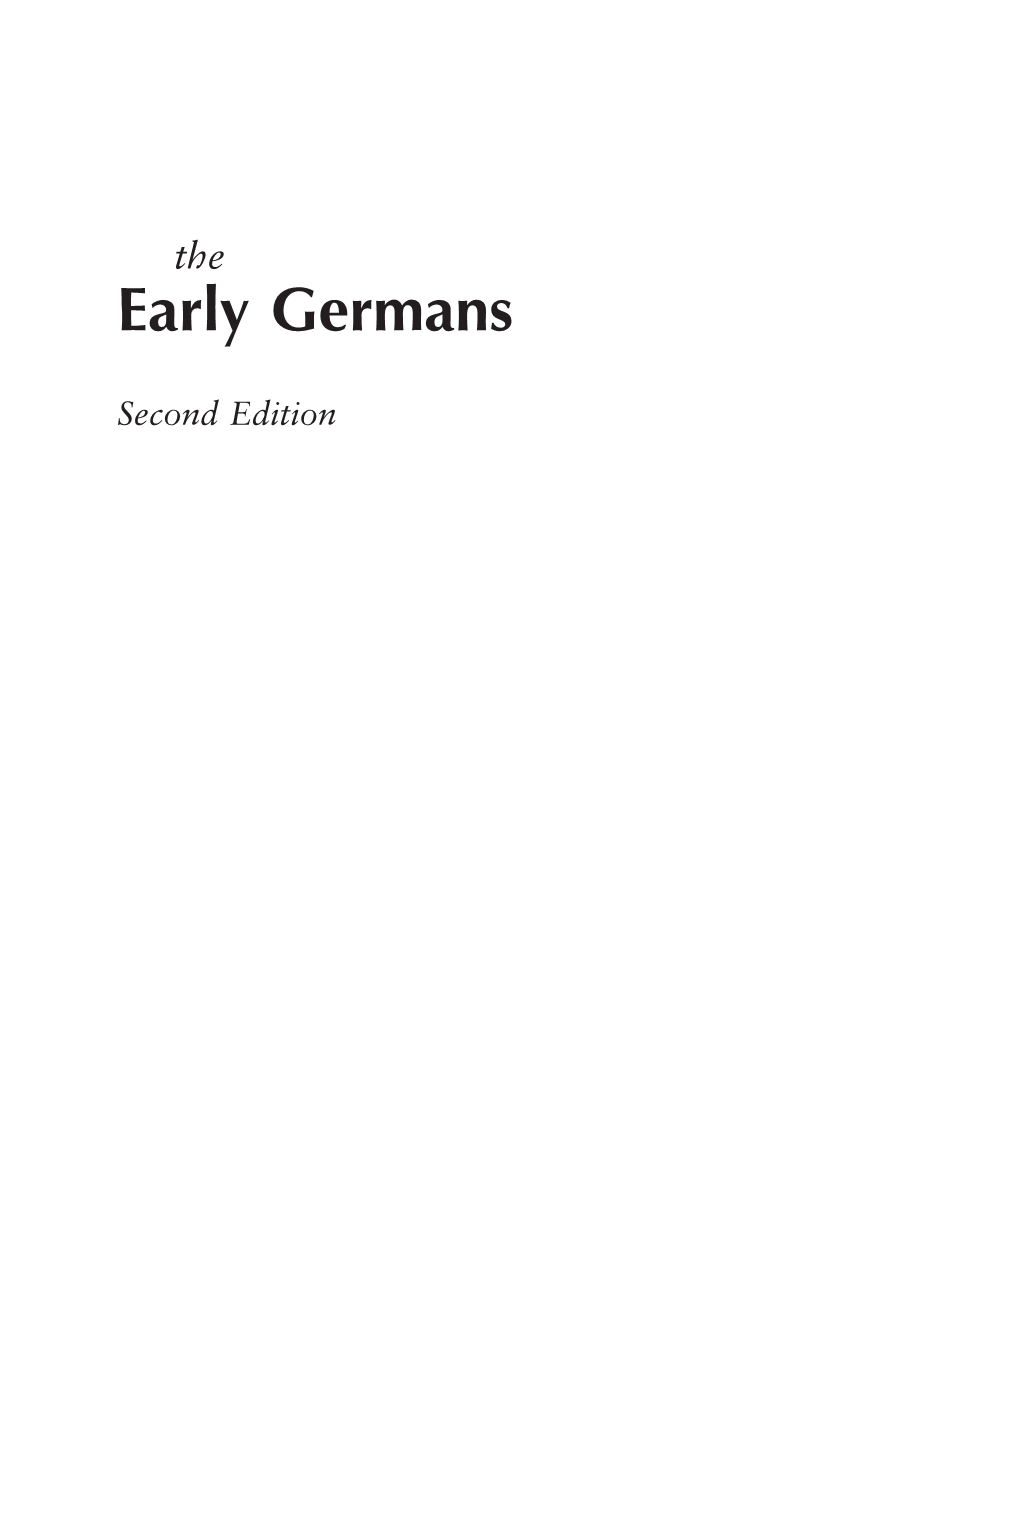 Early Germans